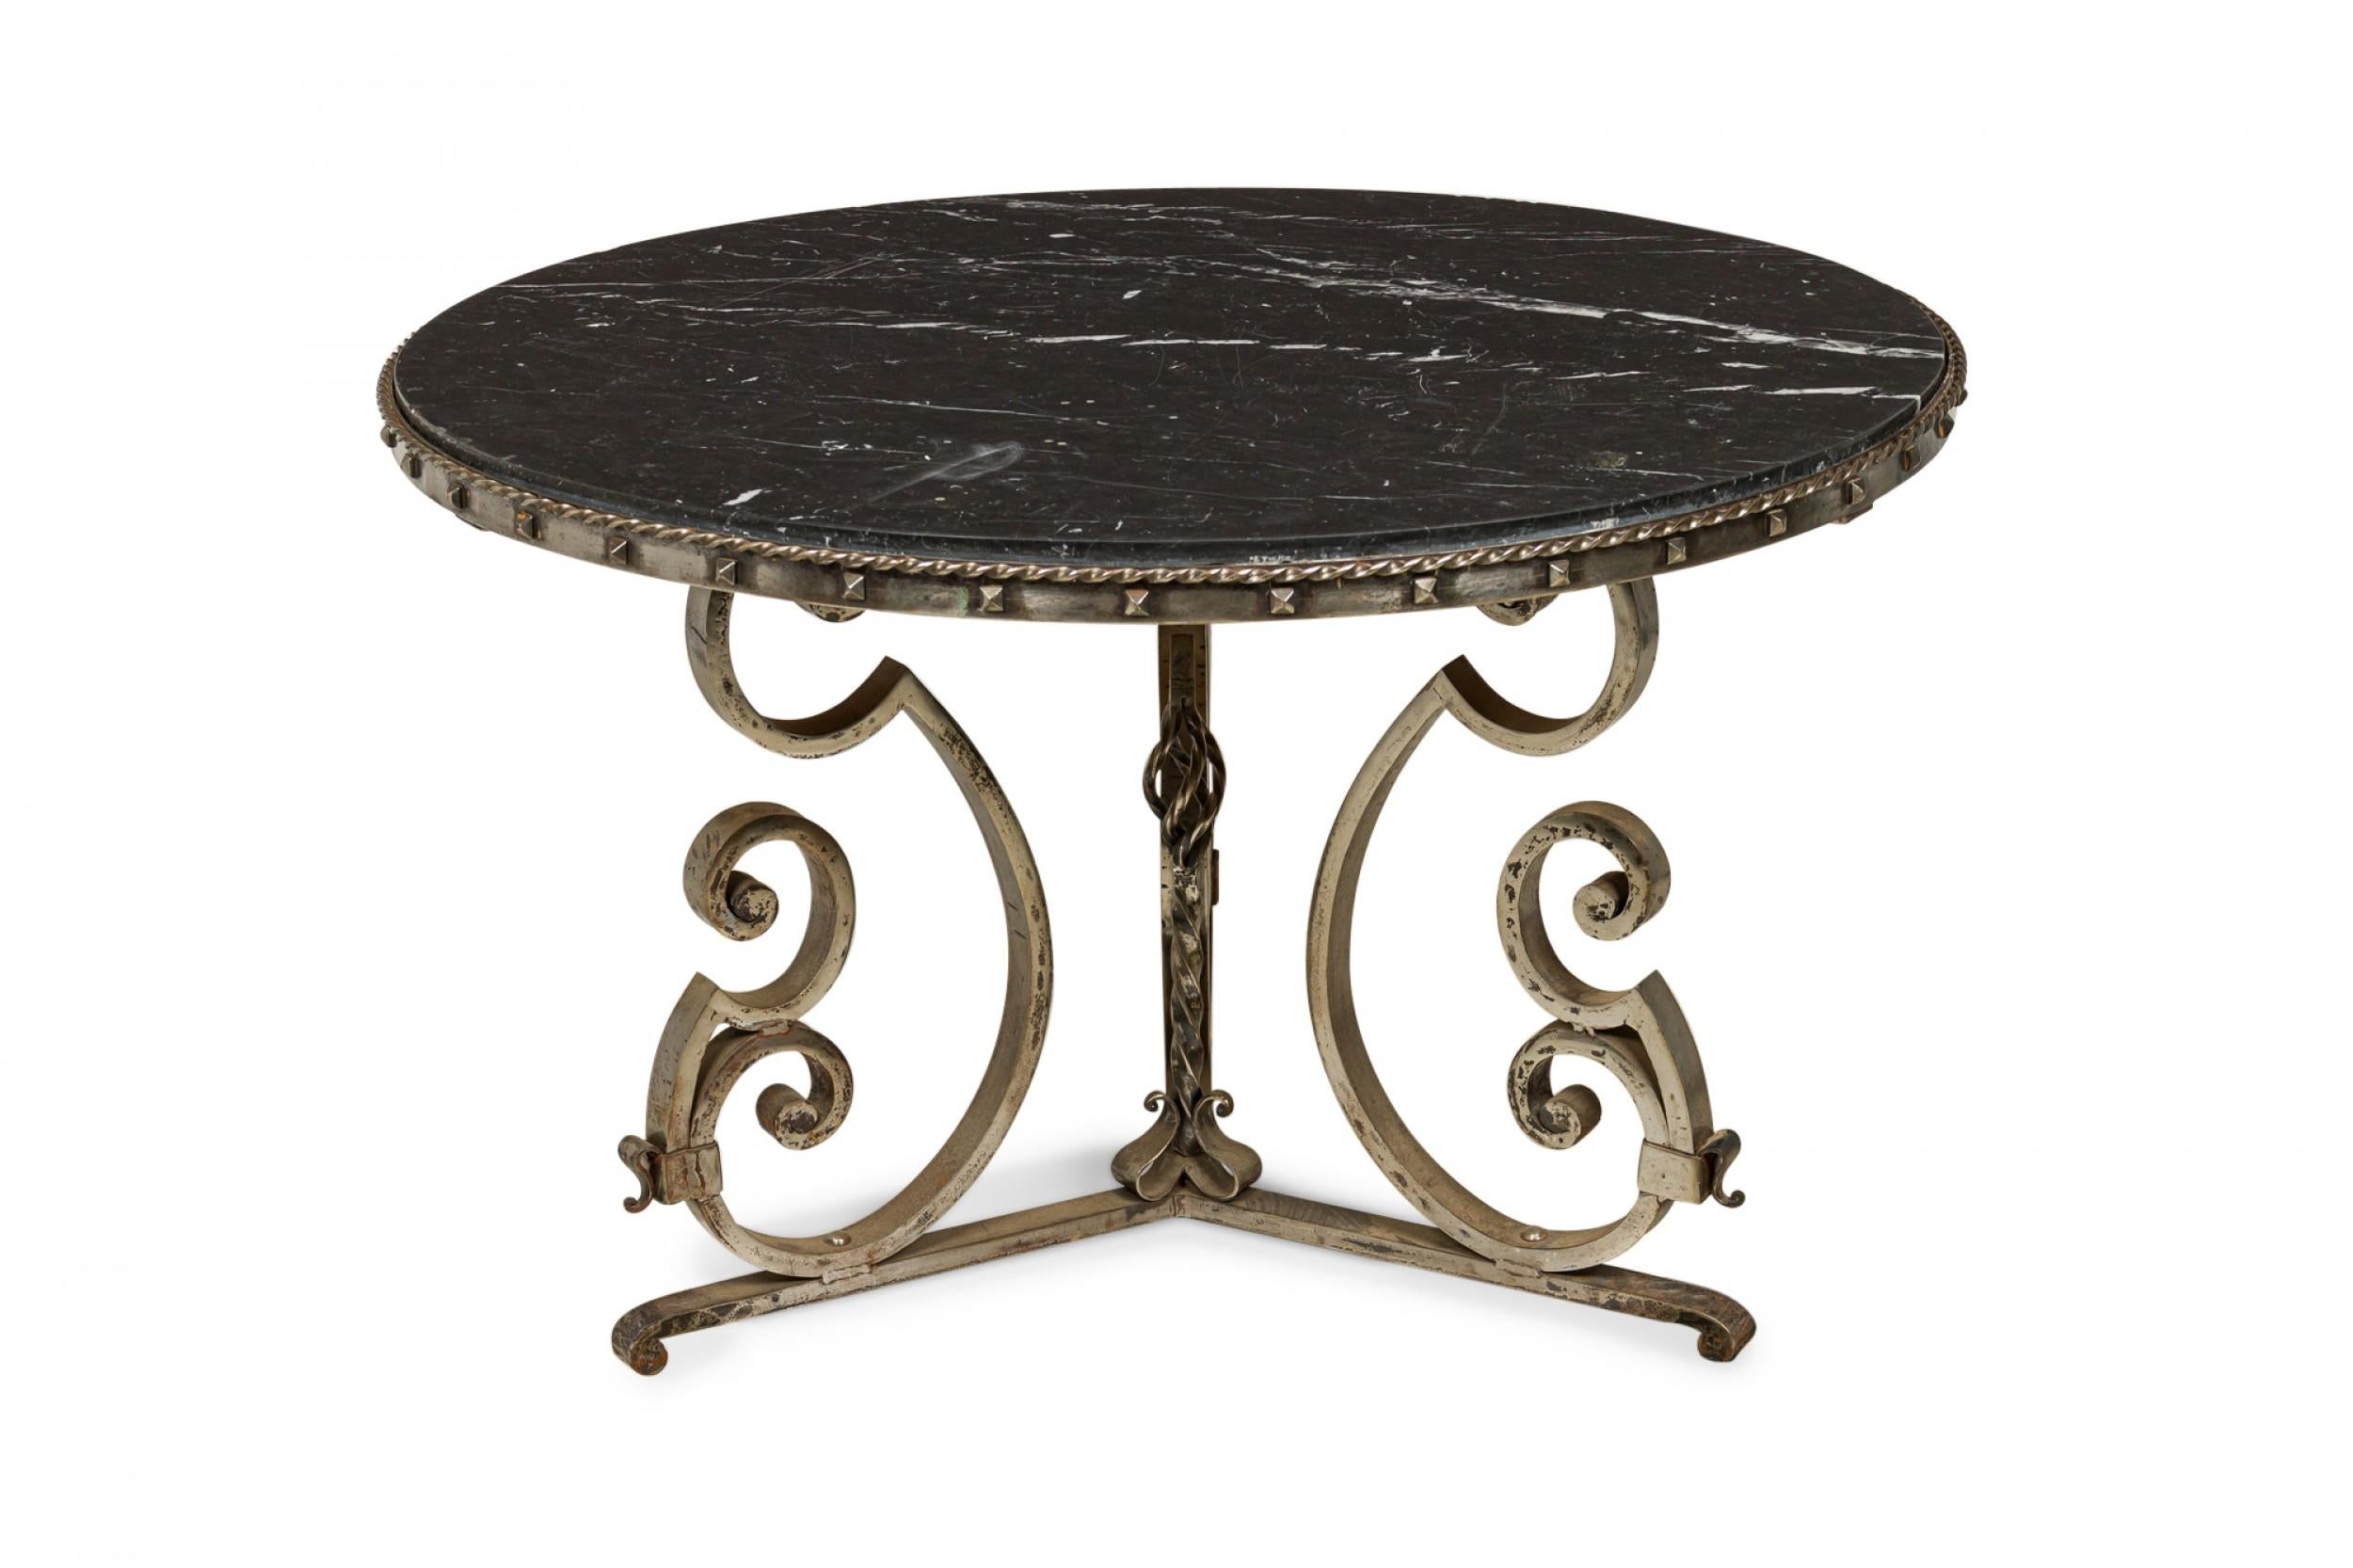 French Art Deco Iron and Black Marble Circular Scoll Form Center Table For Sale 1